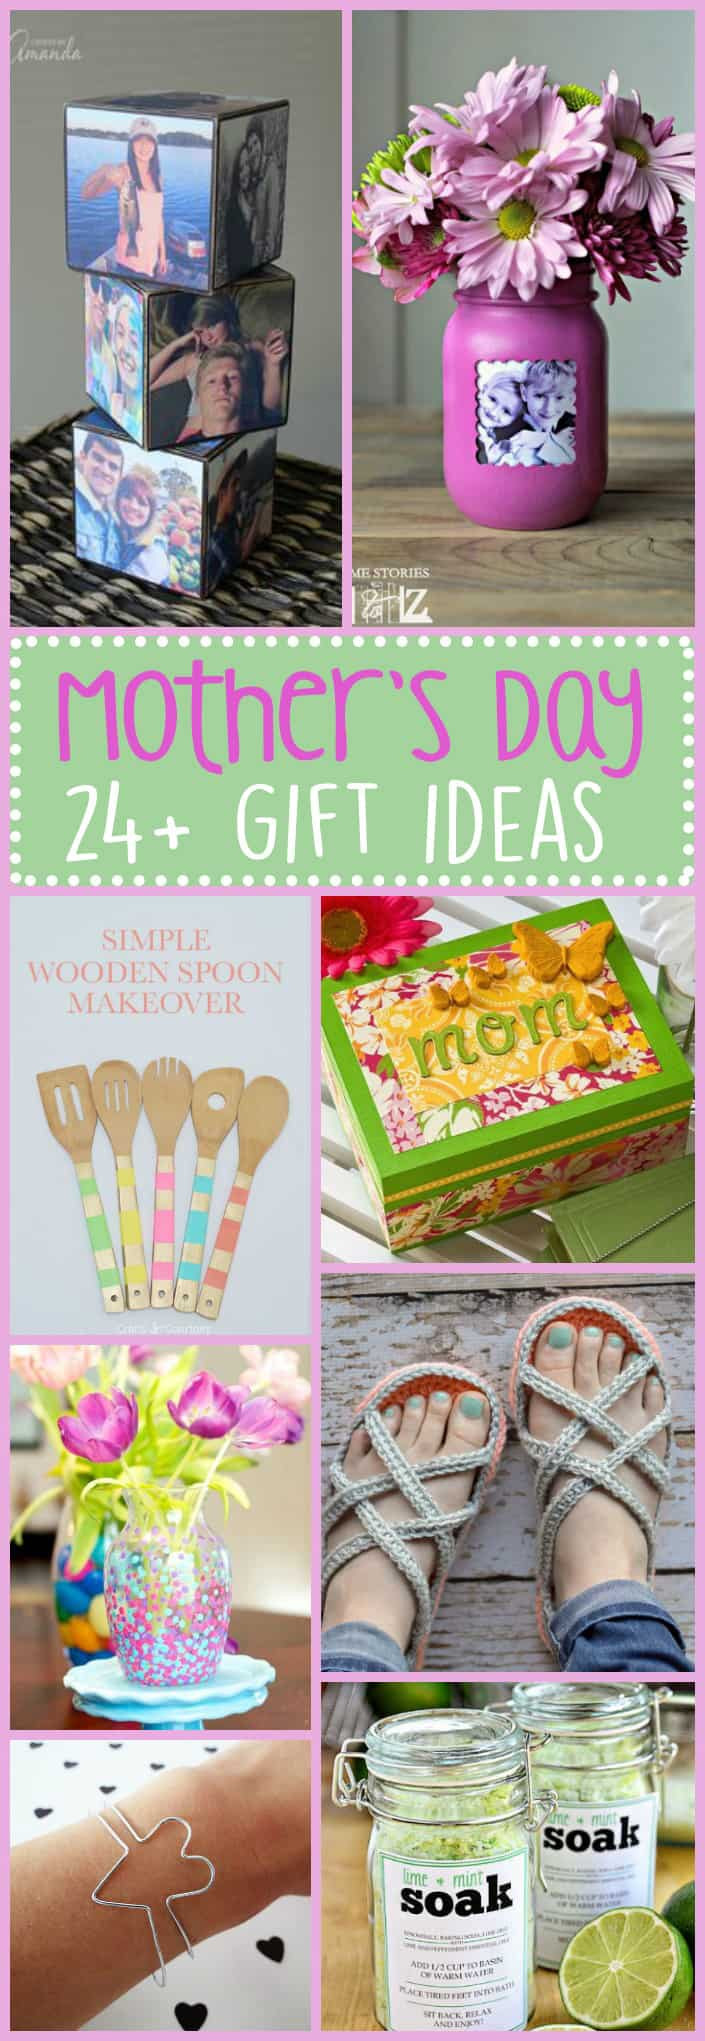 Mother'S Day Gift Ideas From Child
 Mother s Day Gift Ideas 24 t ideas for Mother s Day